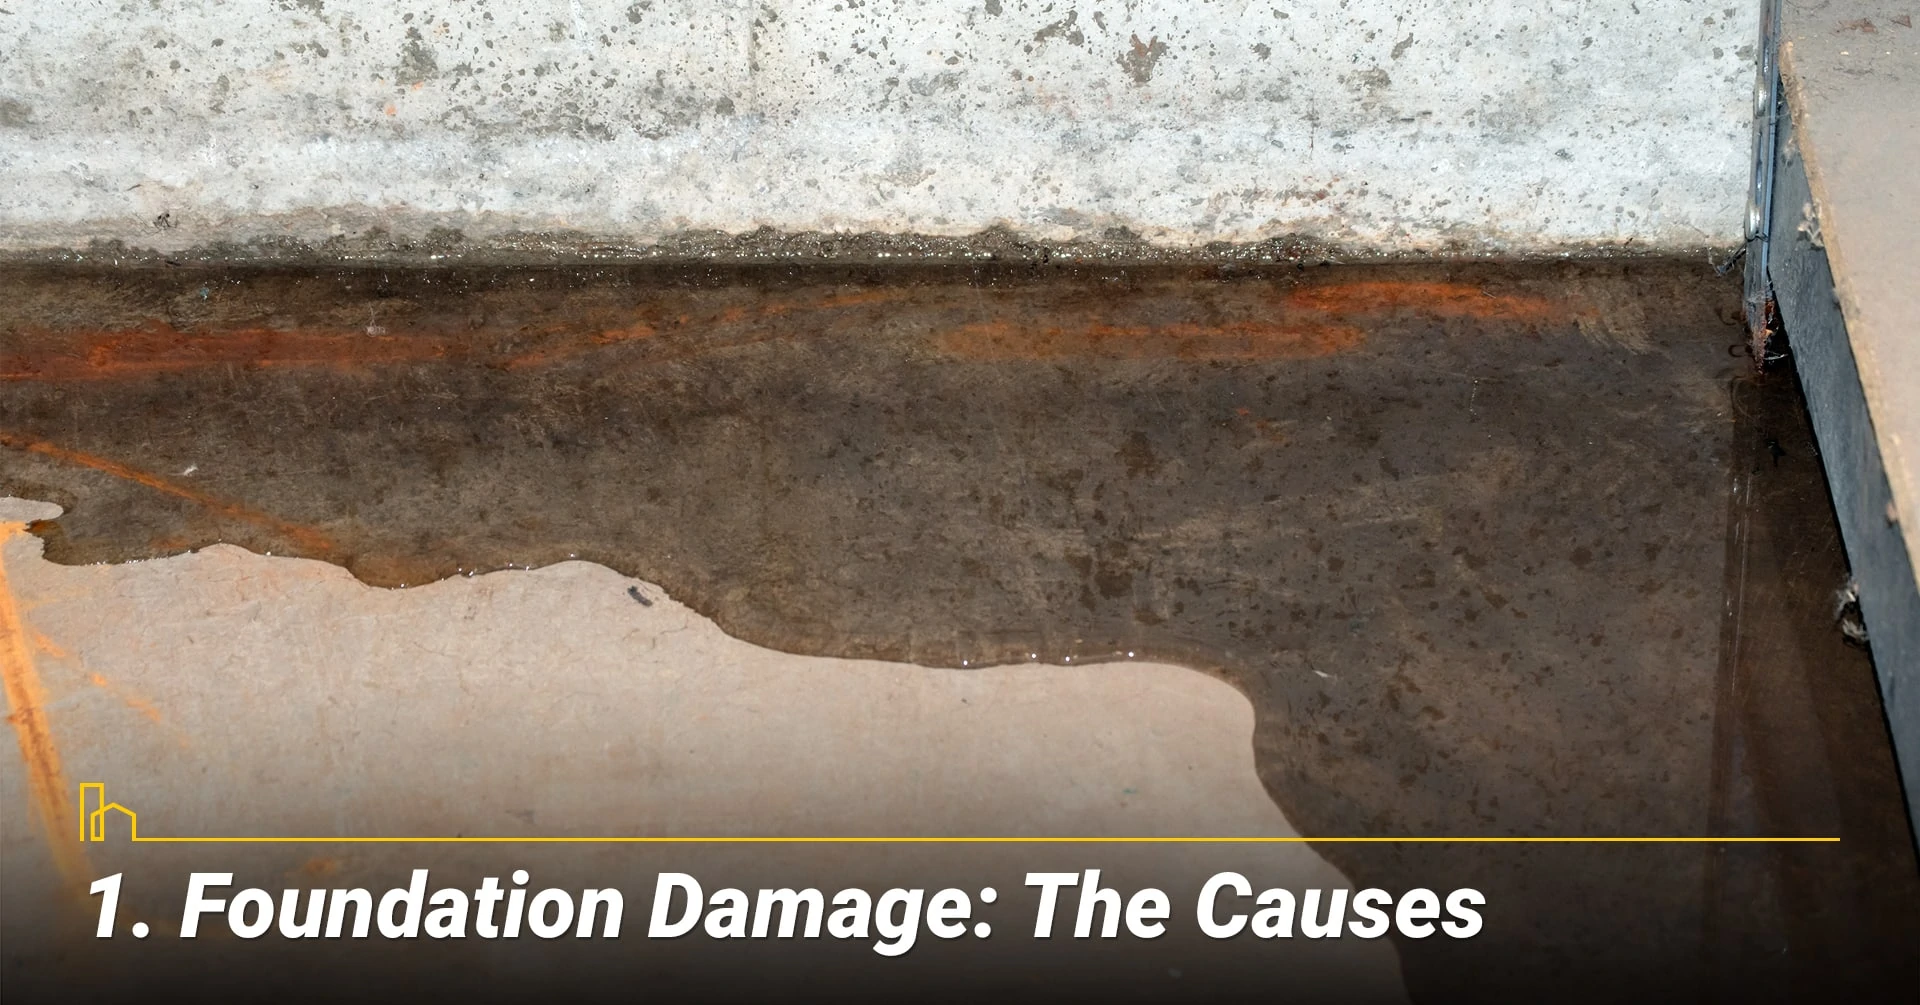 Foundation Damage: The Causes, look for the trouble spot